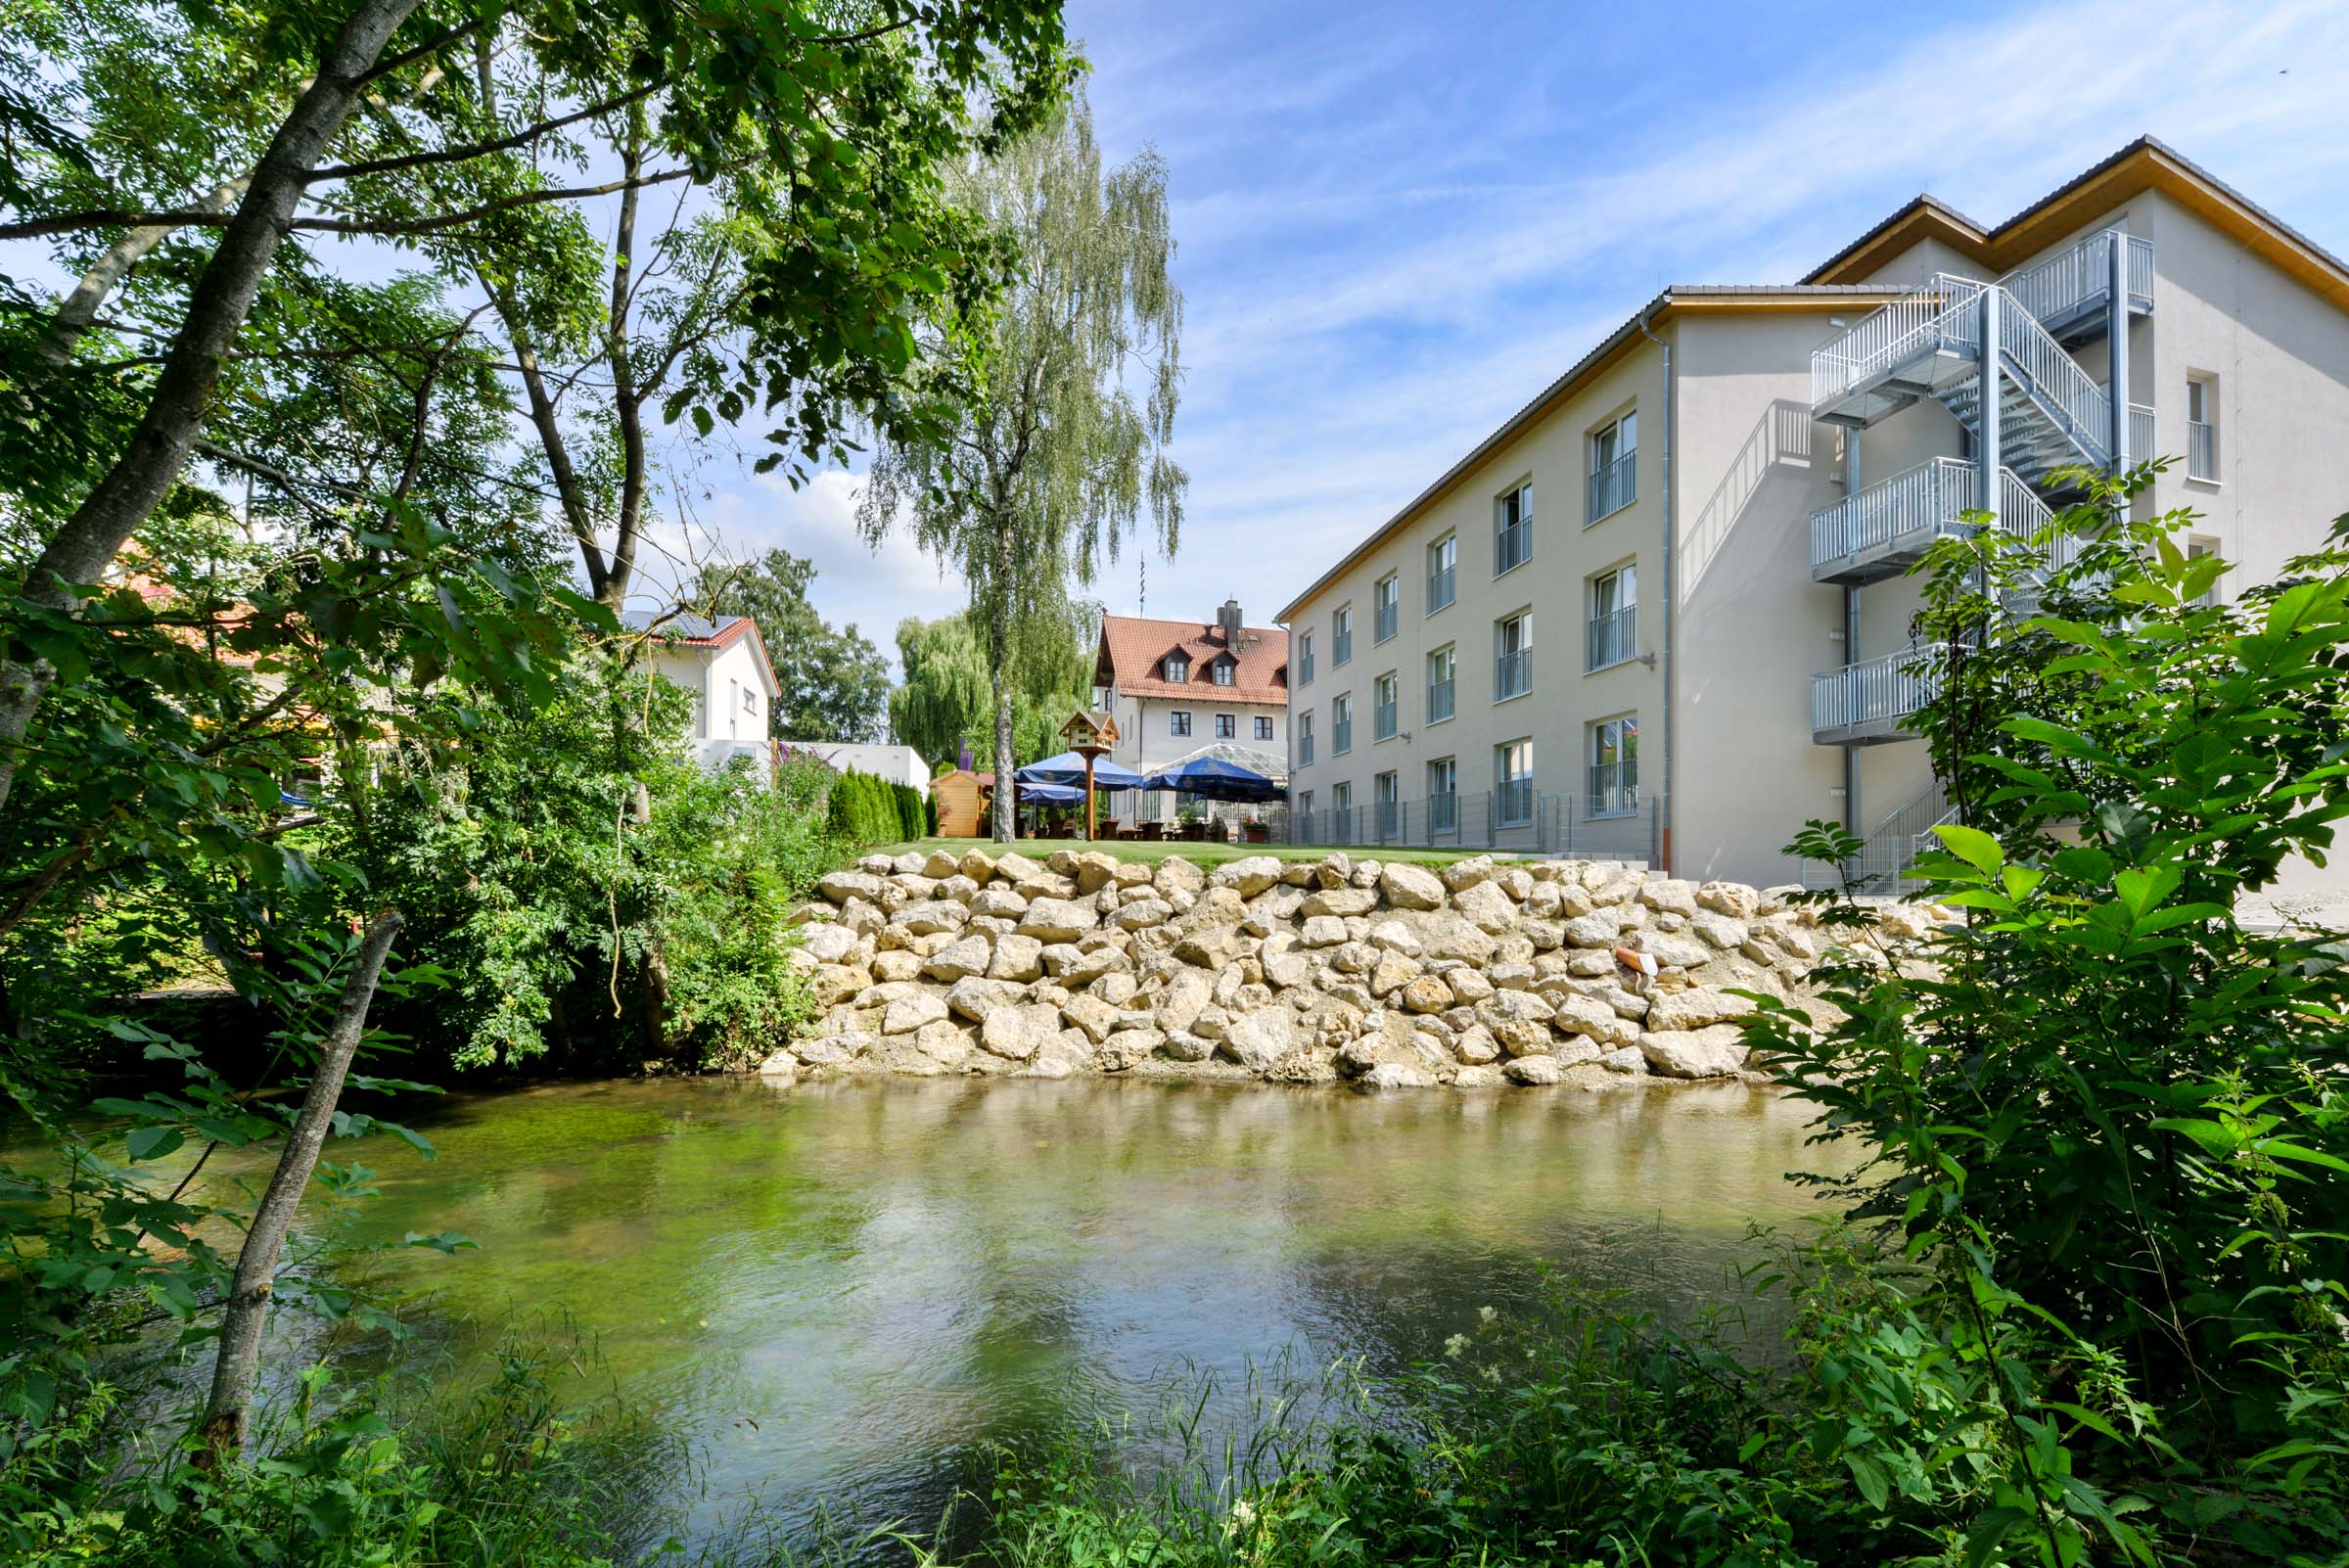 Hotel Nagerl - hotel and restaurant on the Isar cycle path